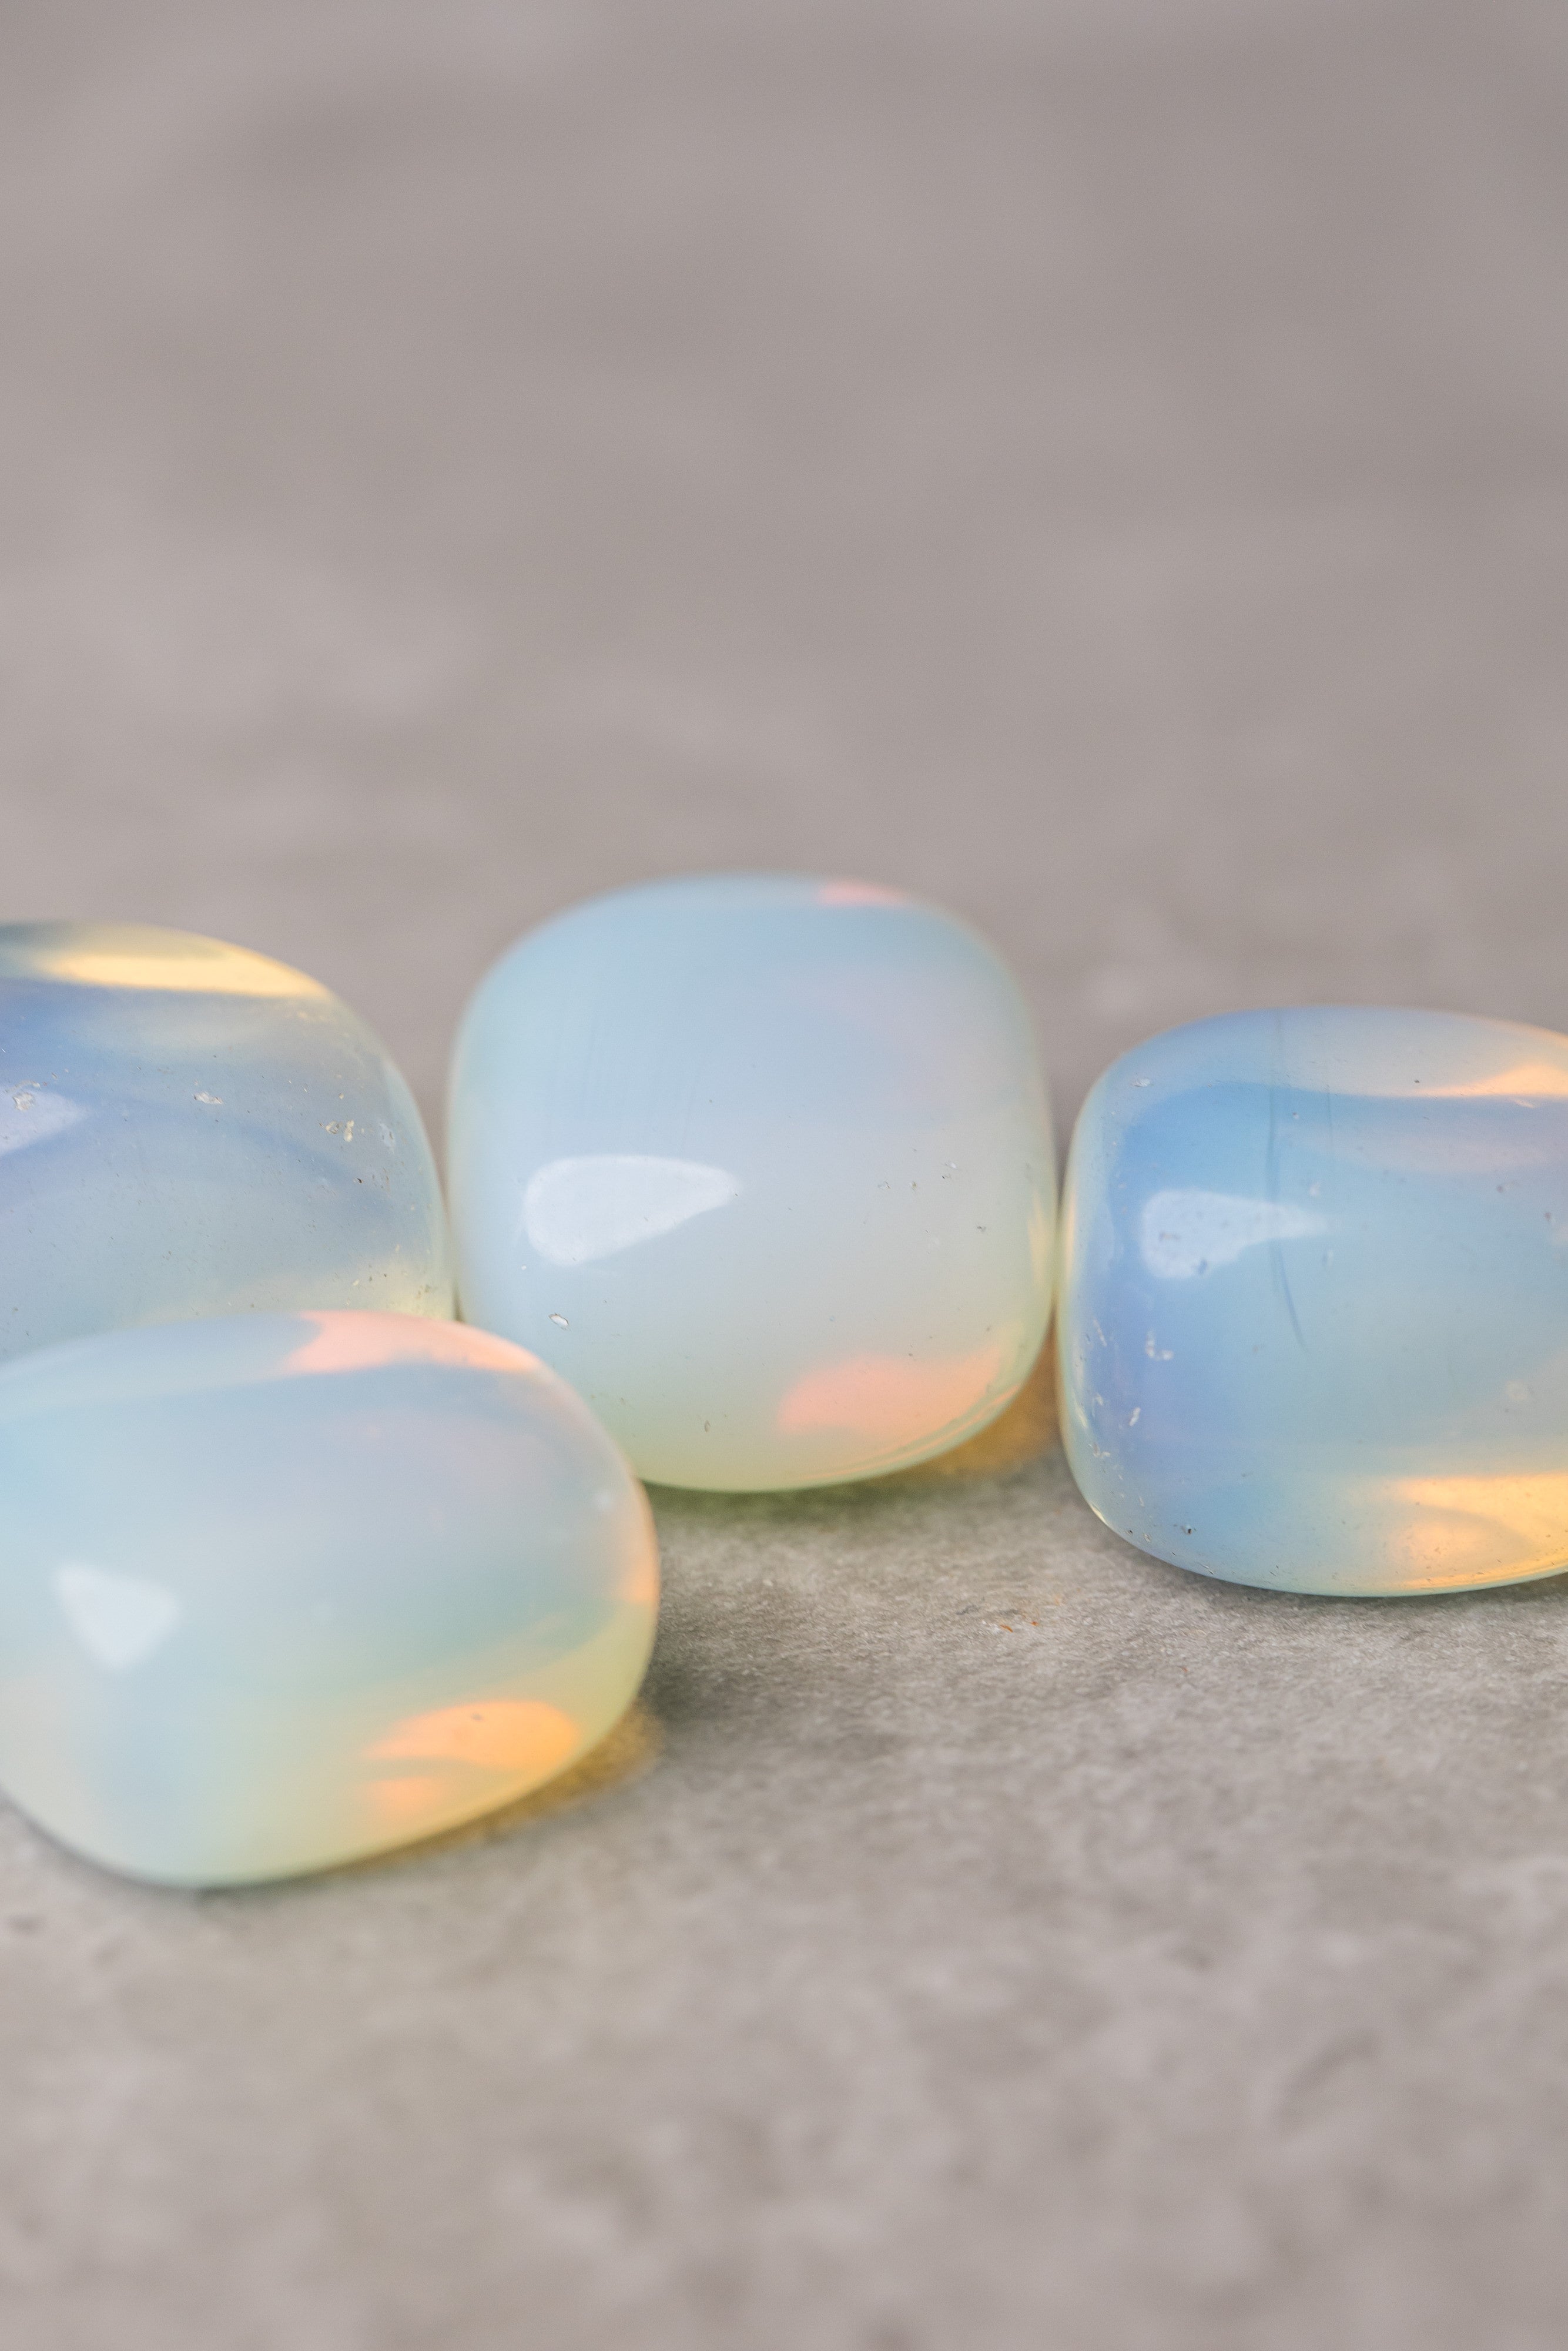 Opalite - Soothing Stone for Emotional Balance and Spiritual Growth - Everyday Rocks